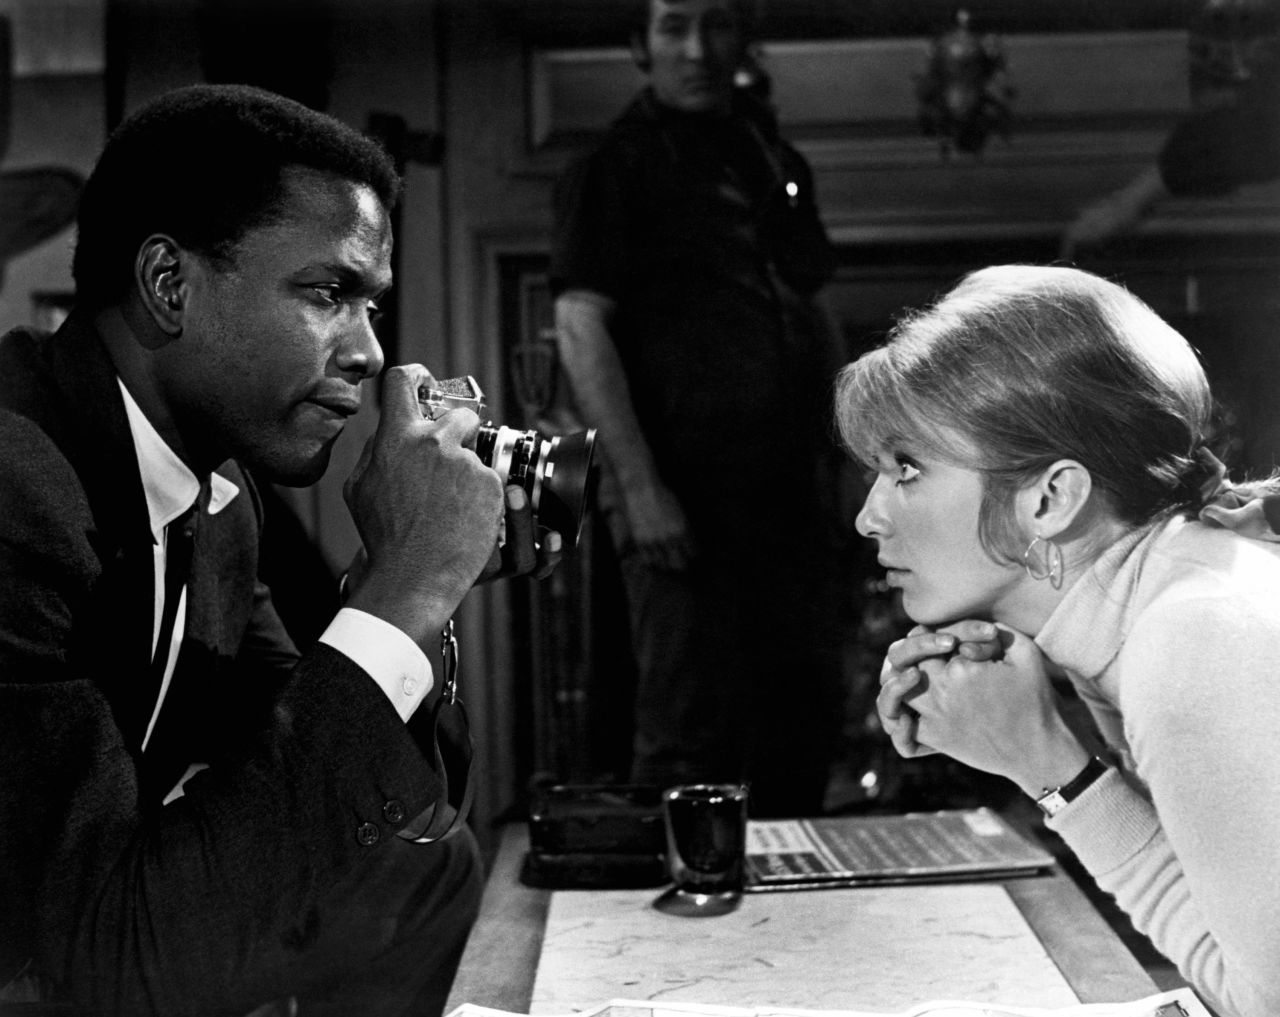 Poitier appears in "The Lost Man" with Joanna Shimkus in 1969. The two married in 1976.